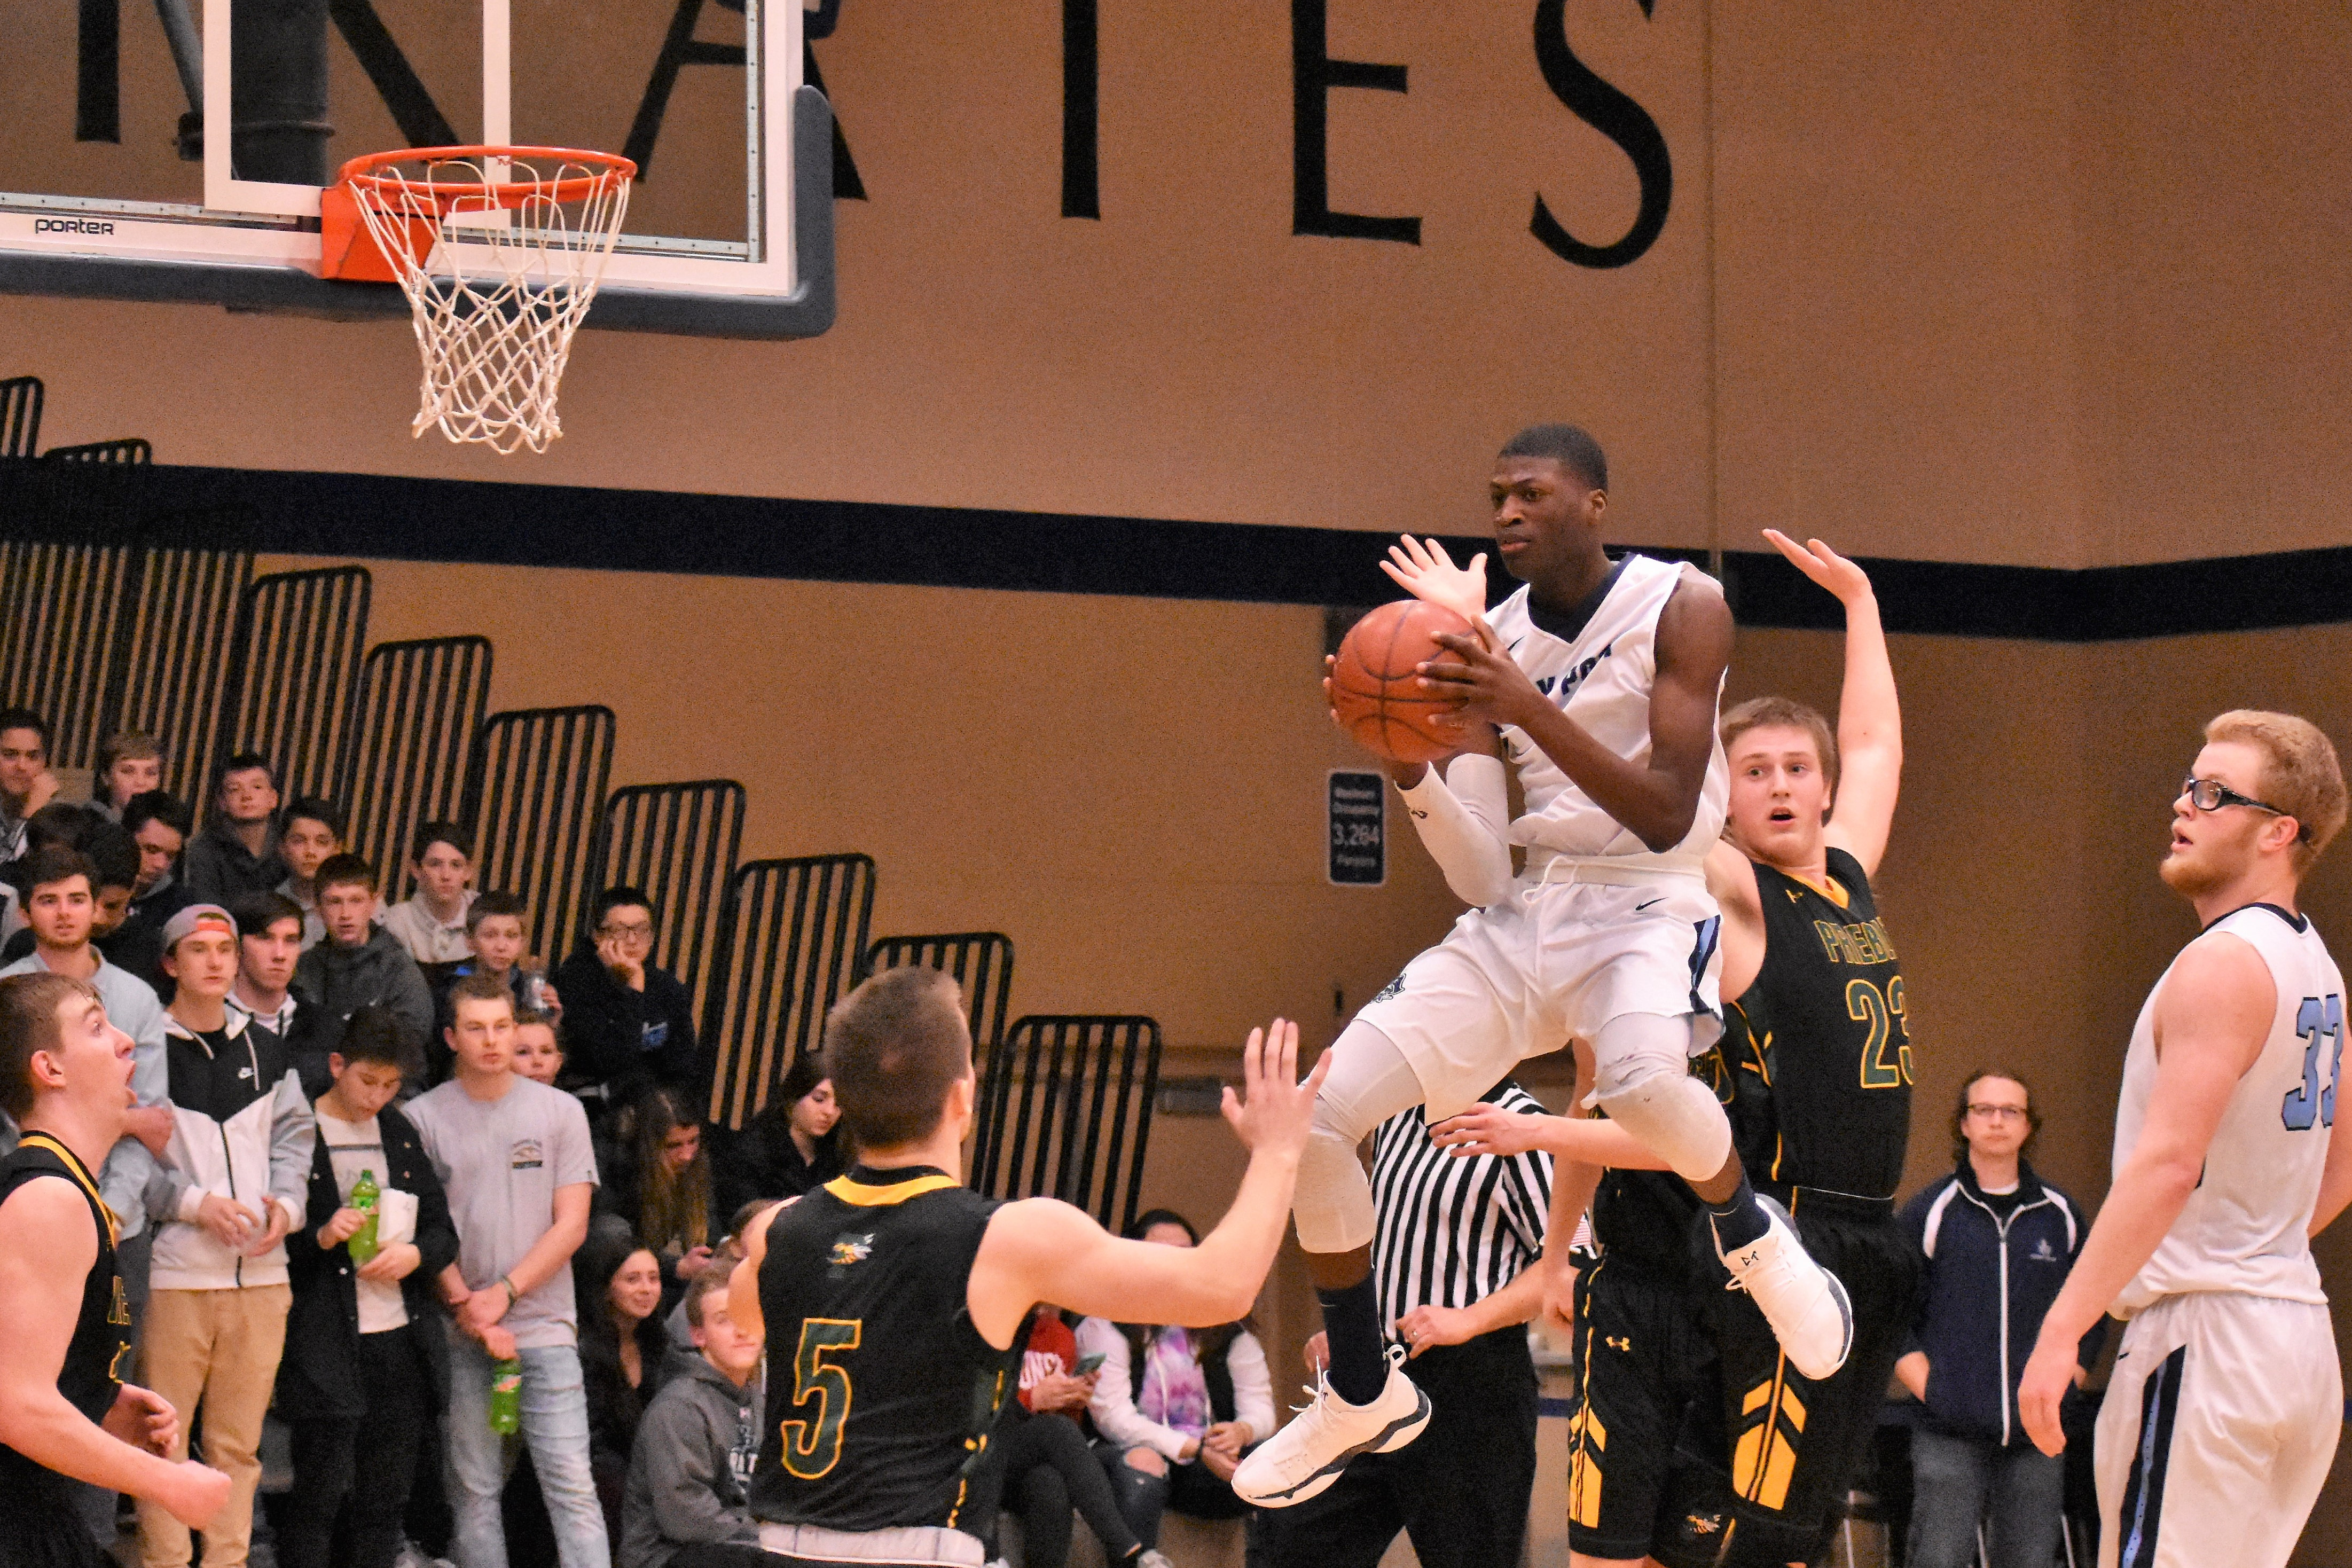 Tinch, Pirates, dunk their way past Hornets